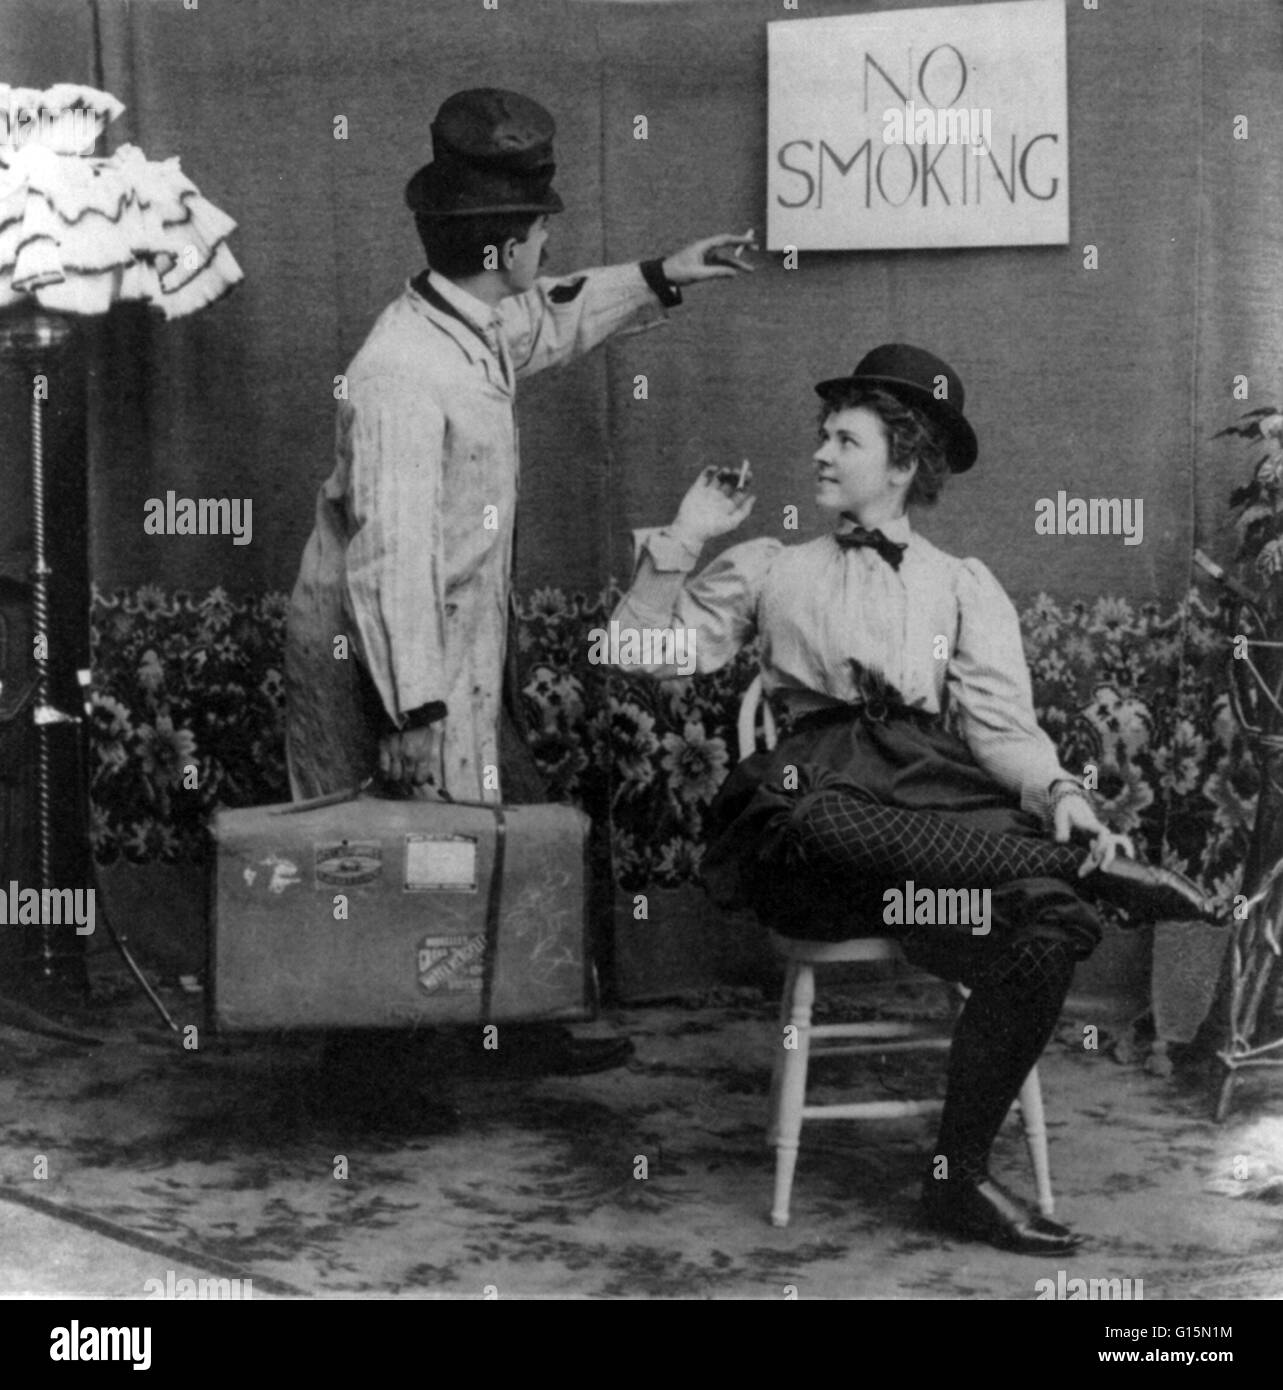 Humorous scene of man pointing to No Smoking sign above woman in derby and bloomers who is smoking cigarette. Bloomers is a word which has been applied to several types of divided women's garments for the lower body at various times. The costume was calle Stock Photo